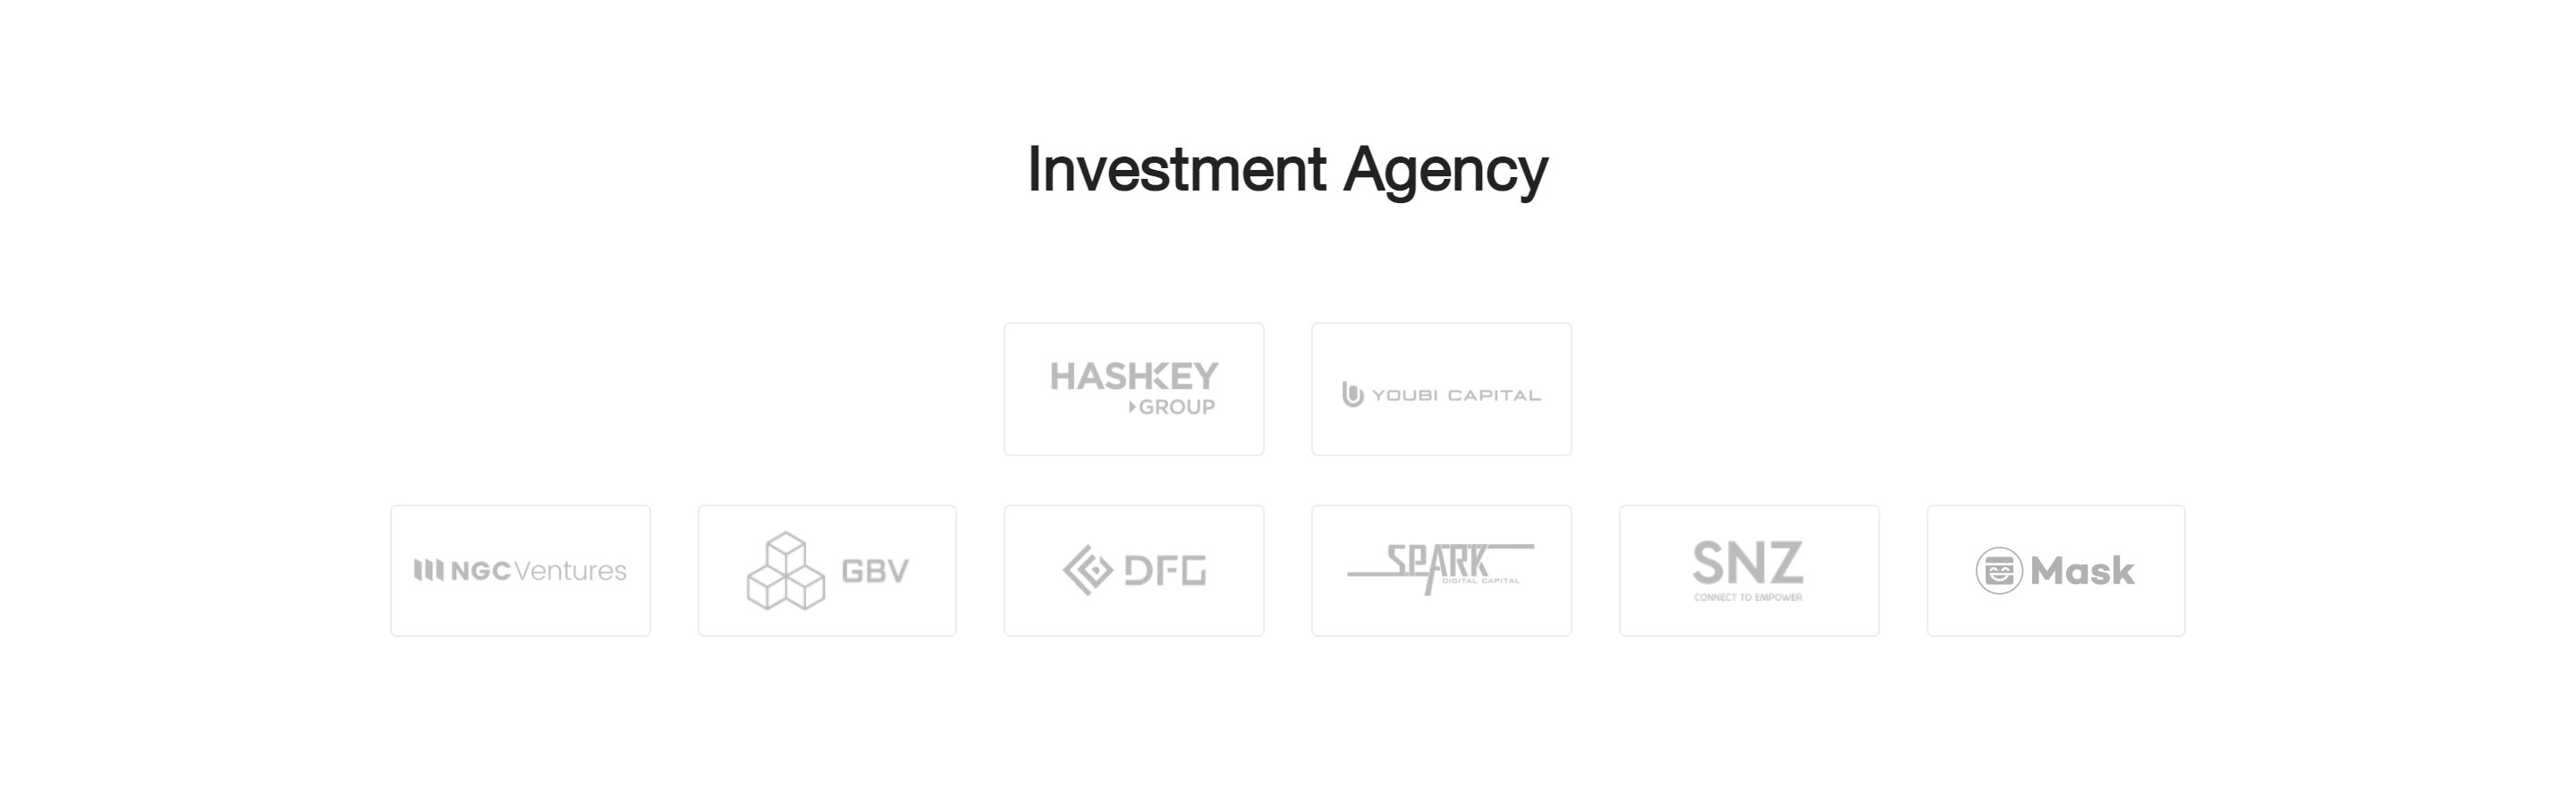 Tabi Investment Agency